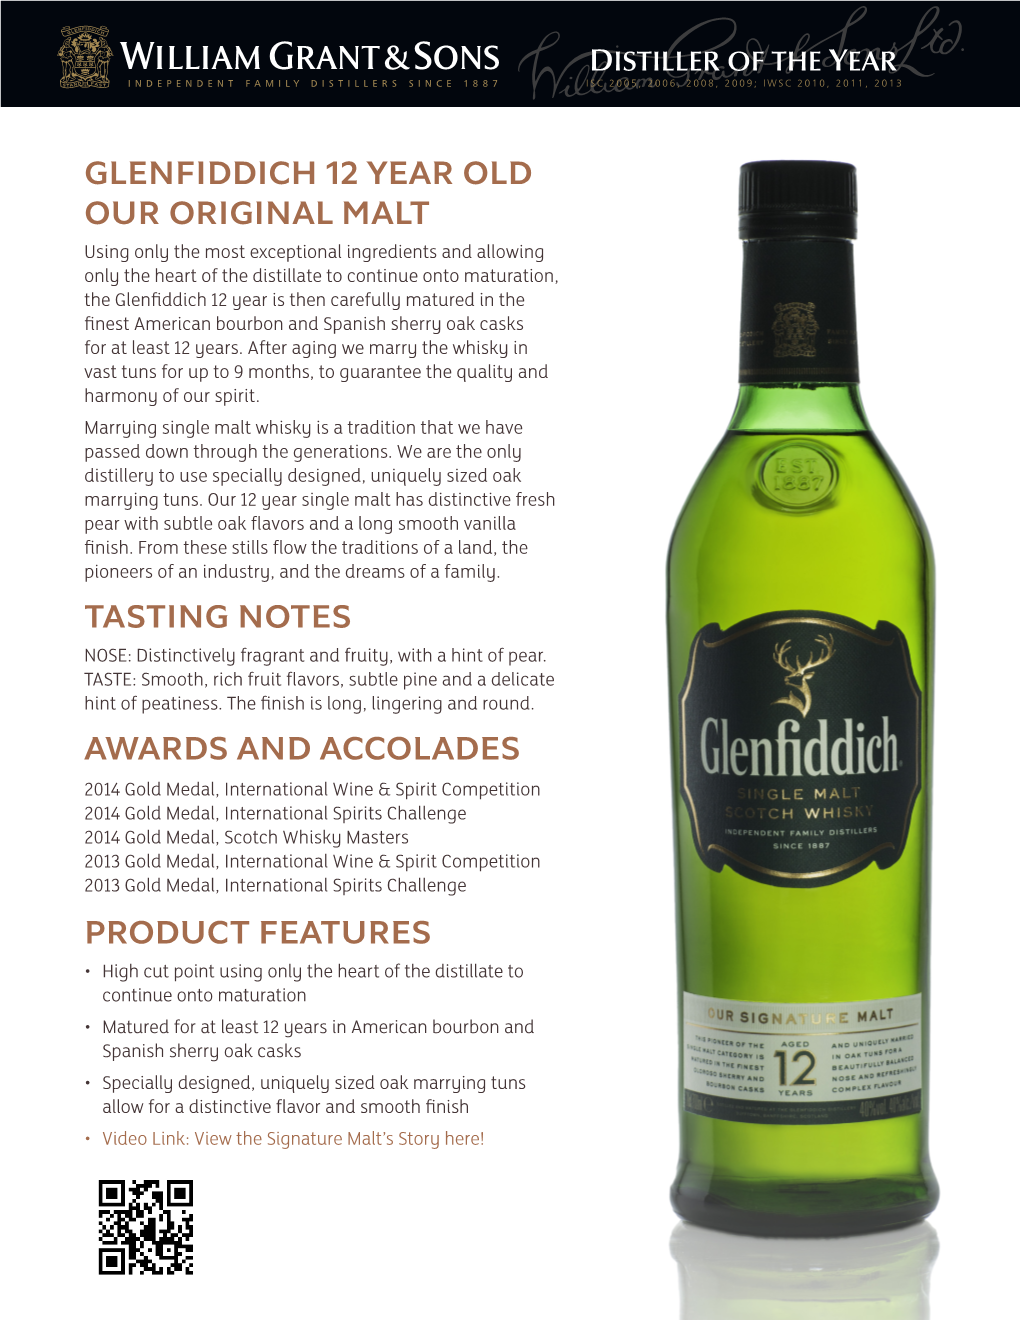 Glenfiddich 12 YEAR OLD OUR ORIGINAL MALT TASTING NOTES AWARDS and ACCOLADES PRODUCT FEATURES